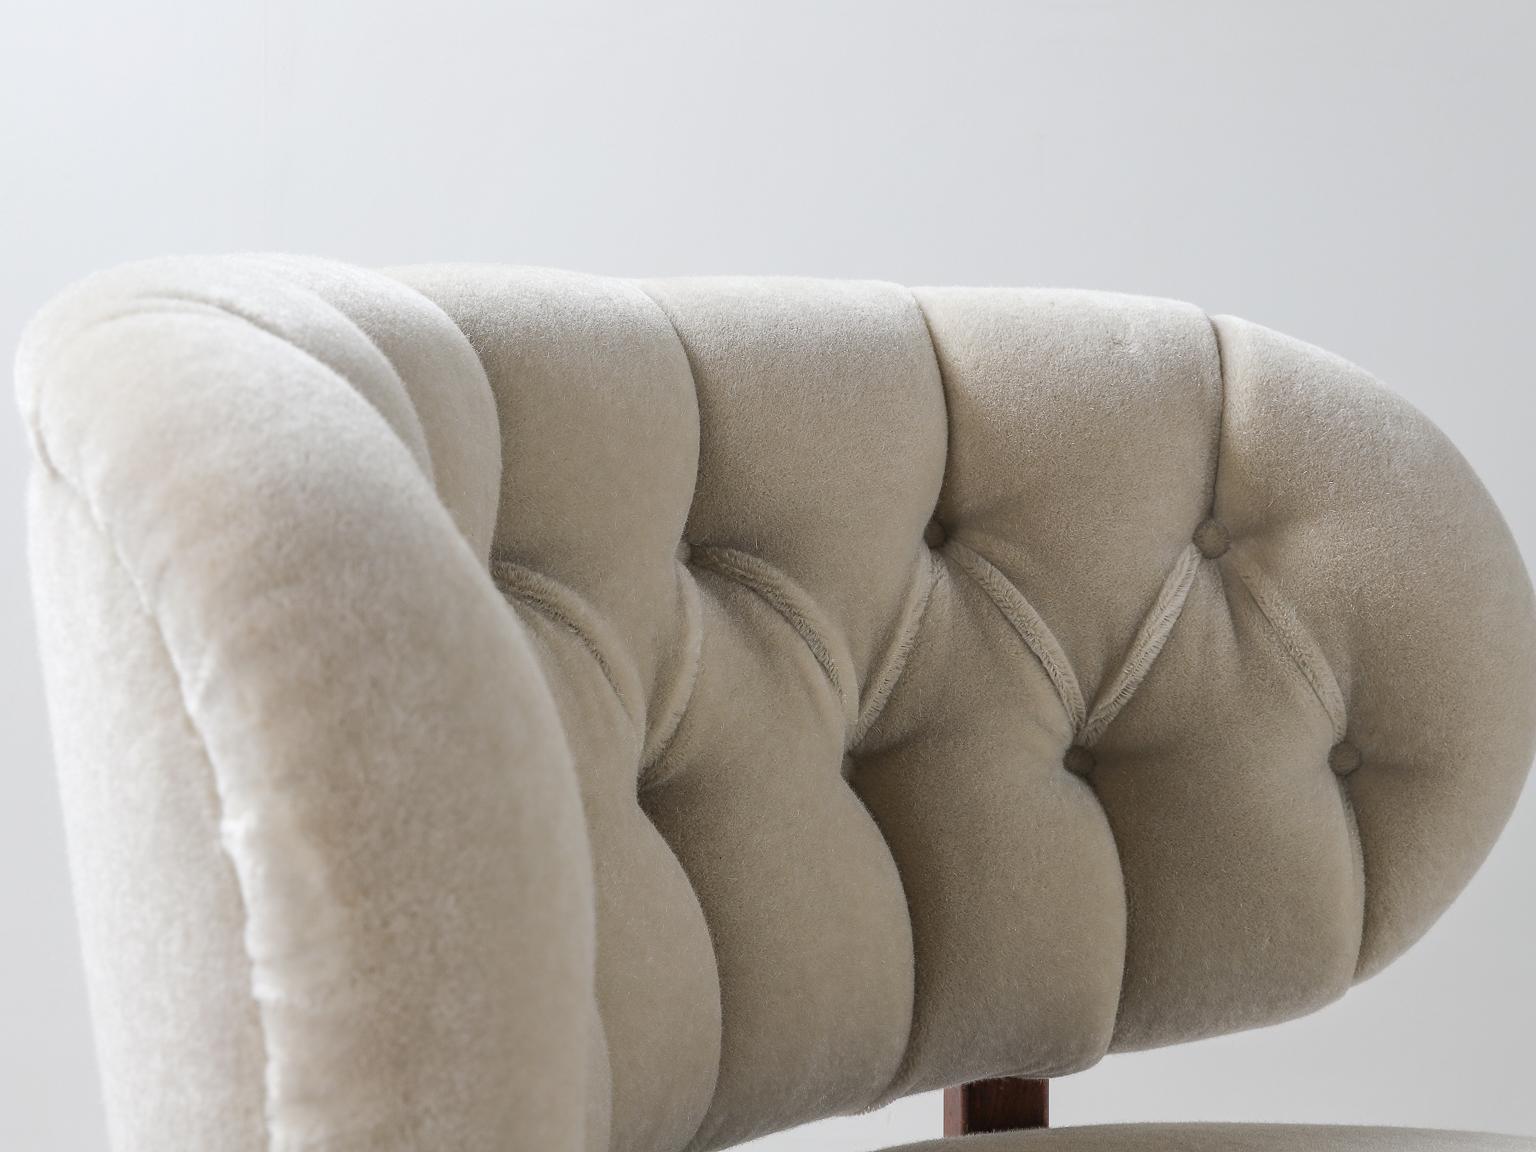 Armchair by Otto Schulz 1930s-1940s Upholstered in Bespoke Mohair 13